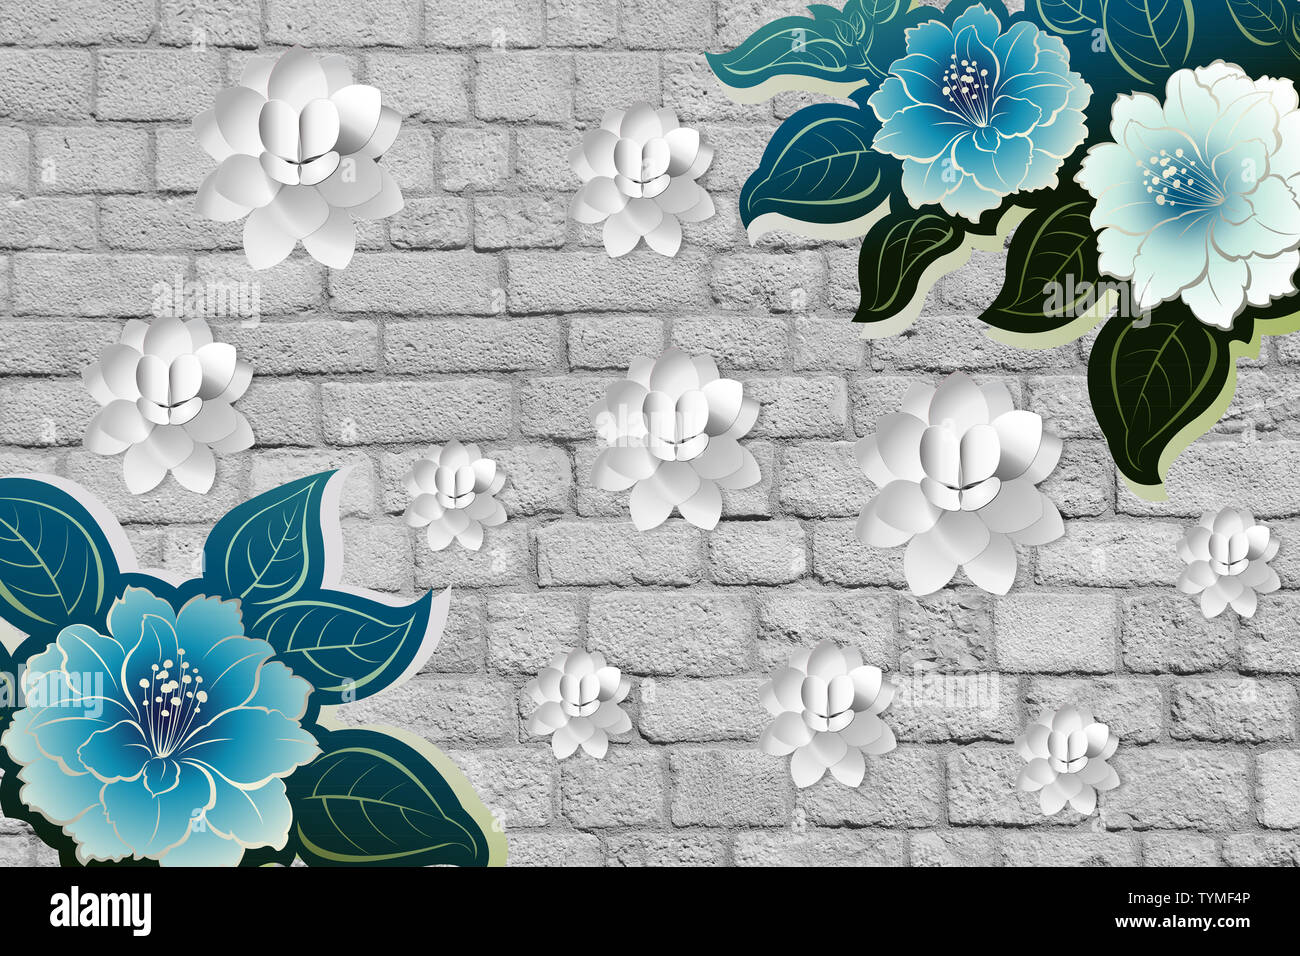 https://c8.alamy.com/comp/TYMF4P/3d-flower-wallpaper-with-wall-of-bricks-wood-stone-and-leaf-TYMF4P.jpg